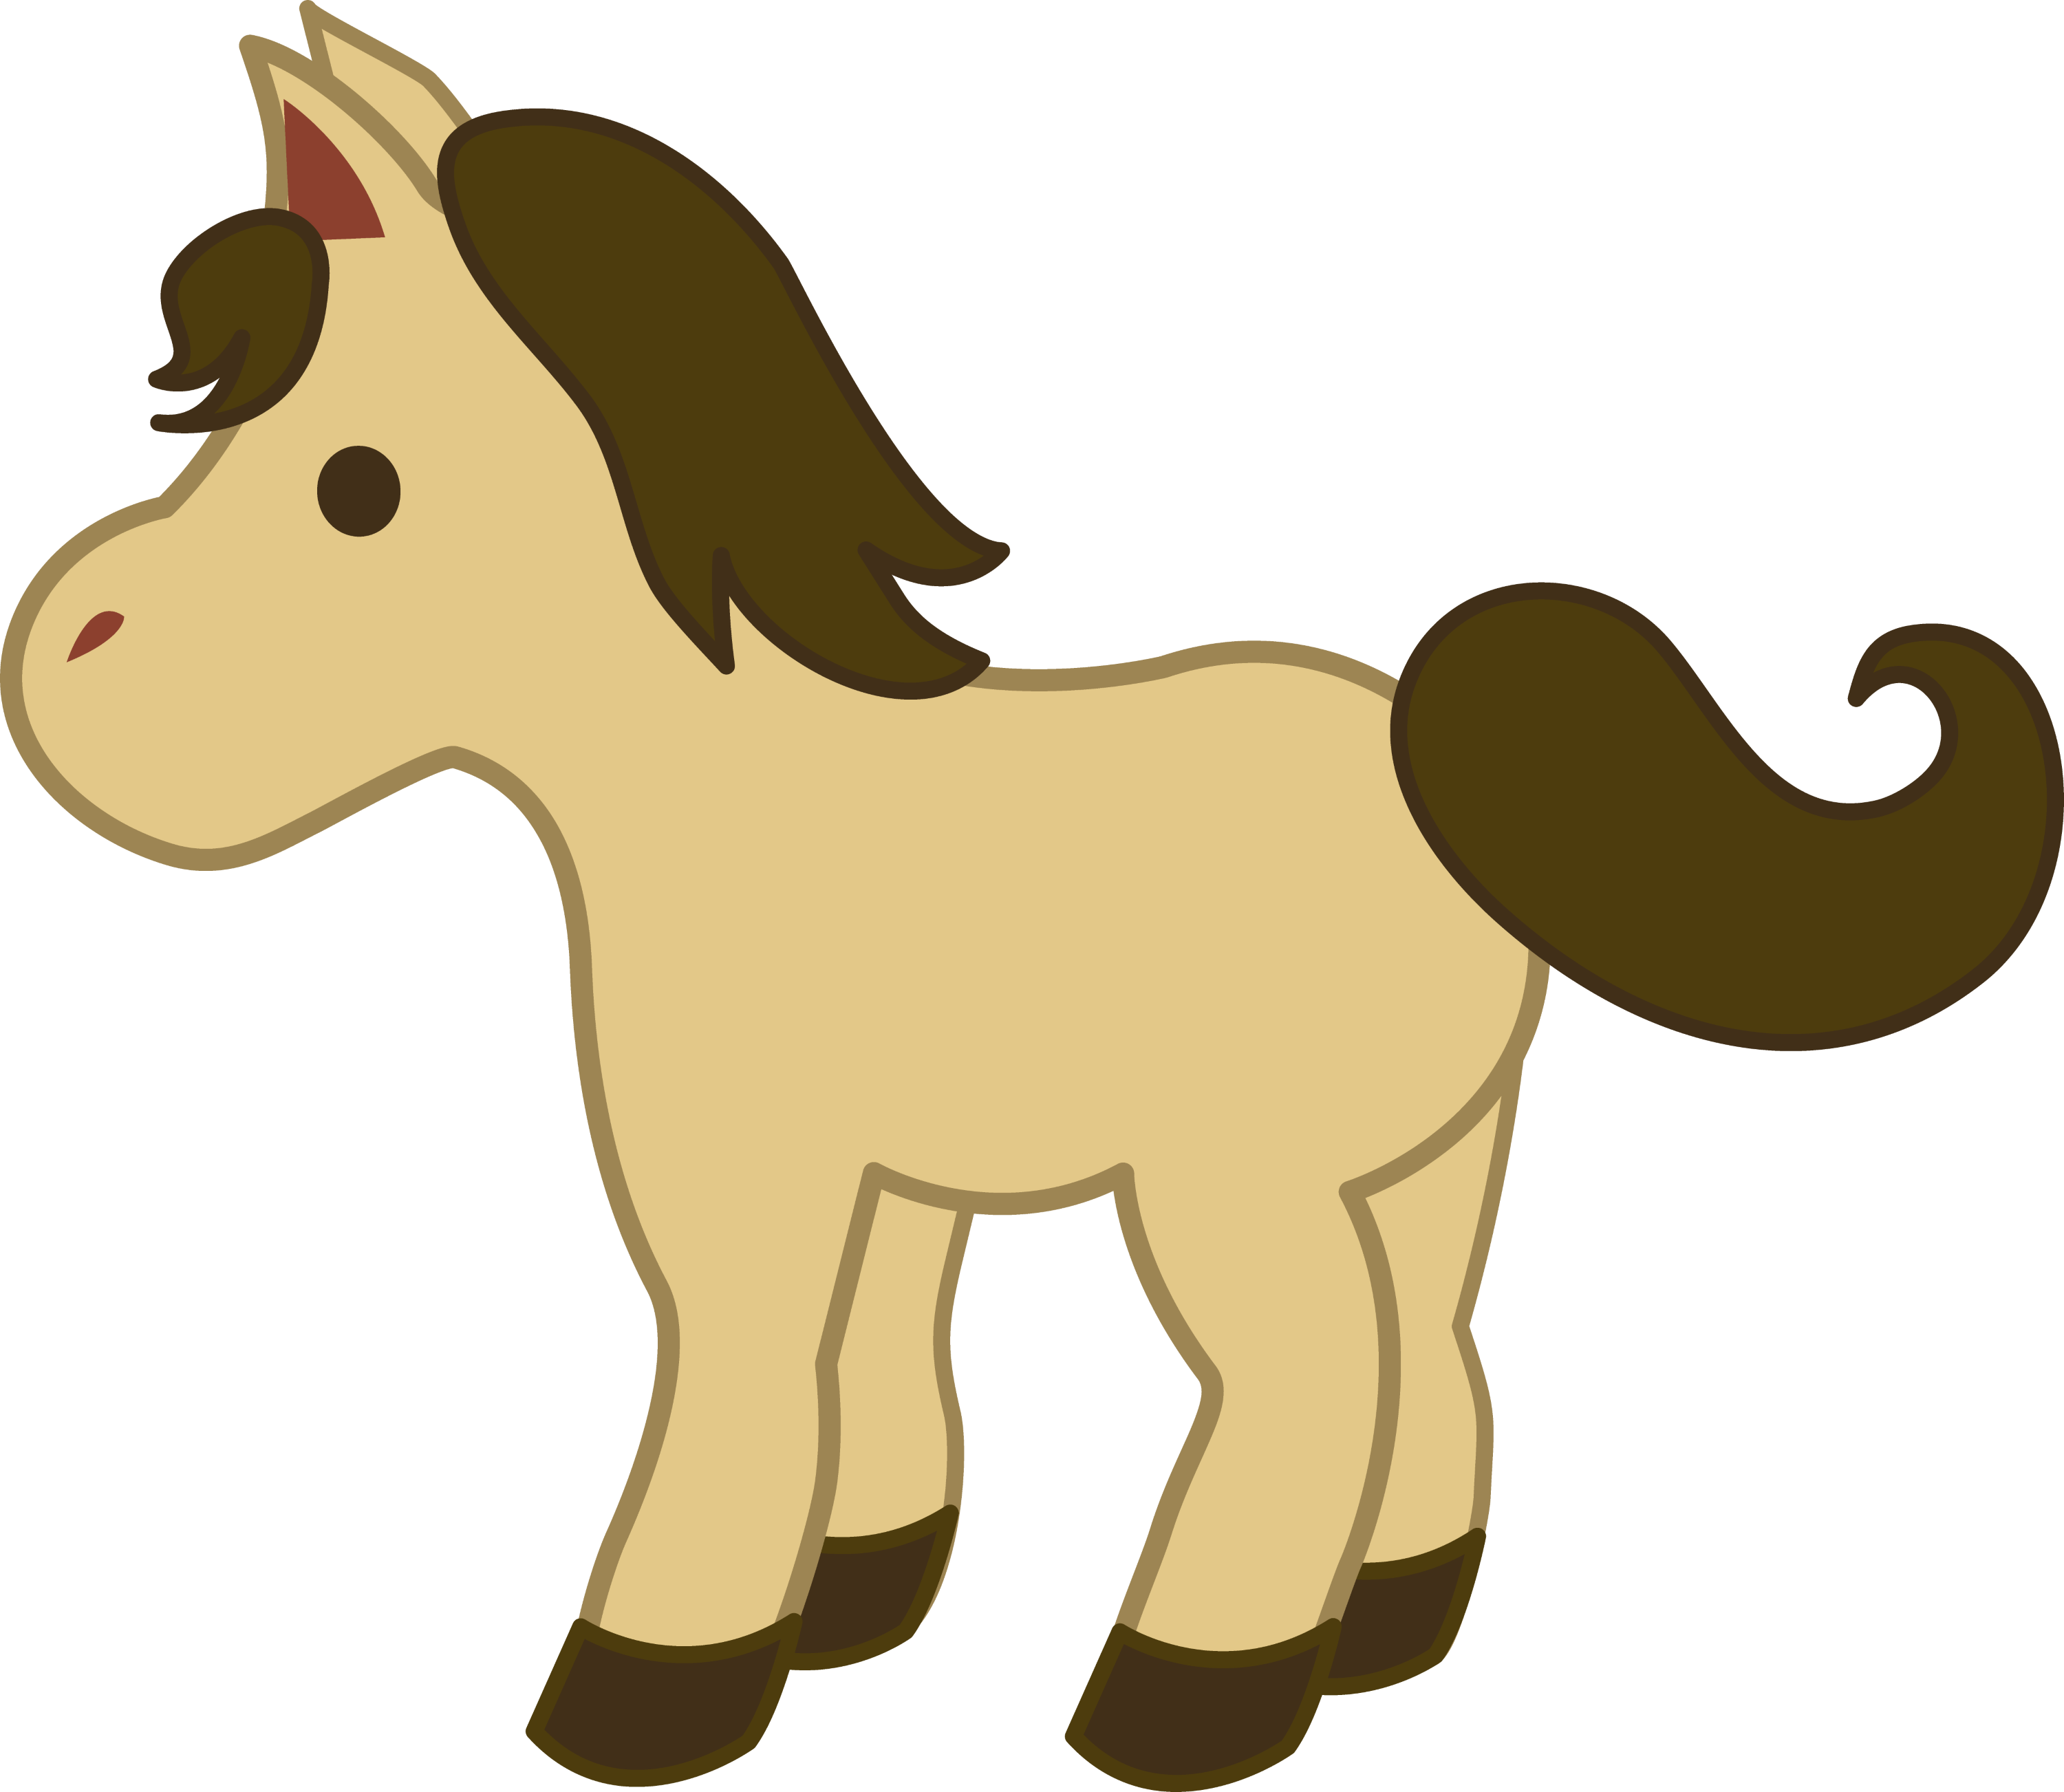 free clipart images horses - photo #37